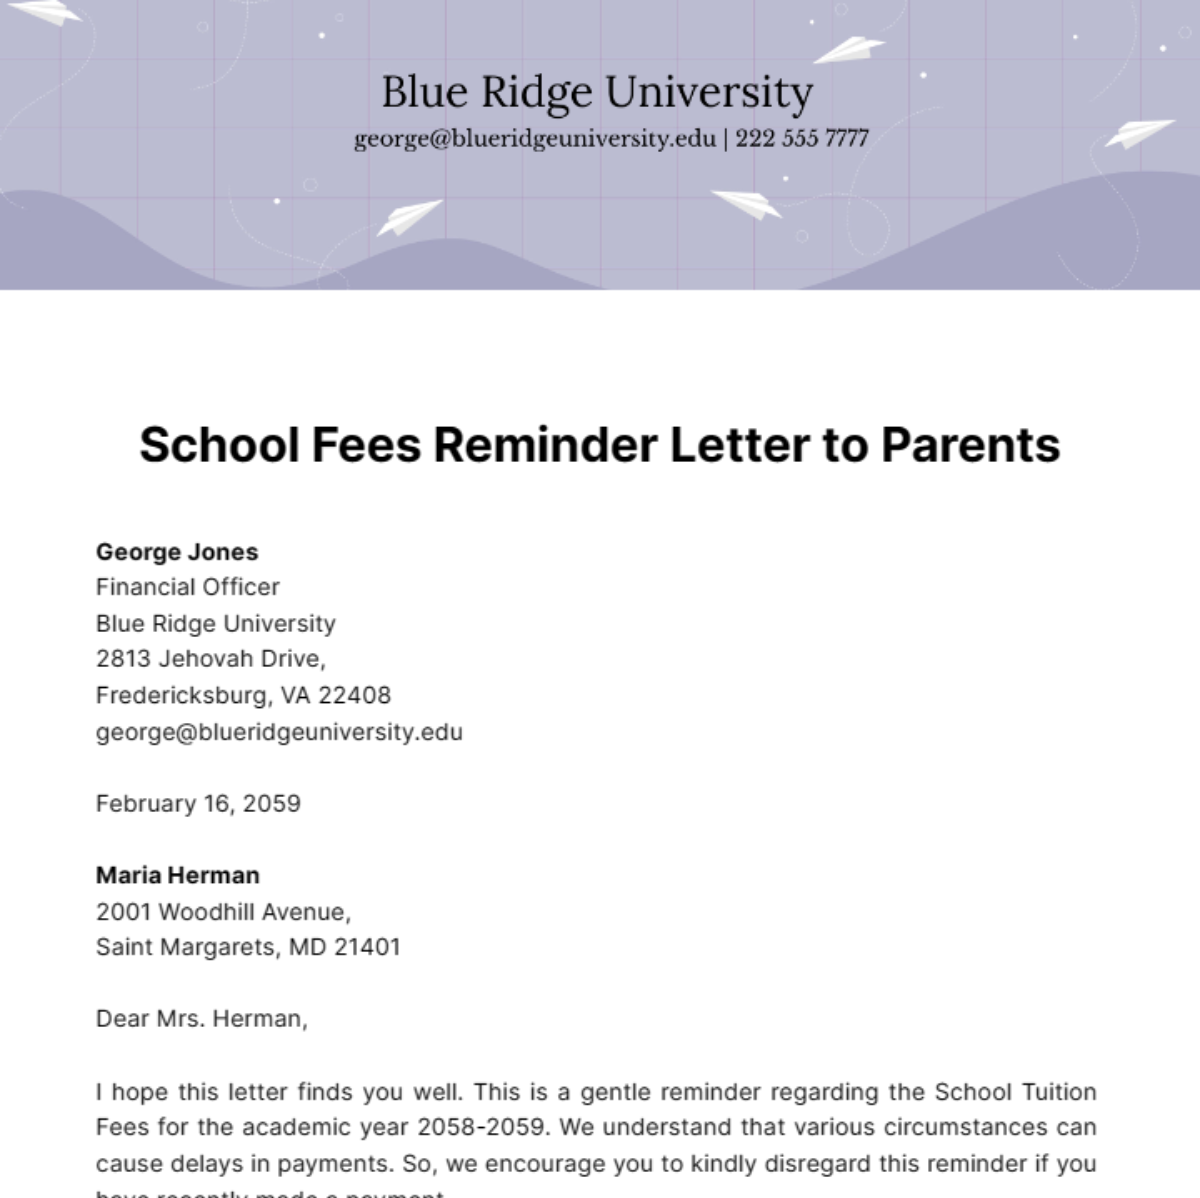 School Fees Reminder Letter to Parents Template